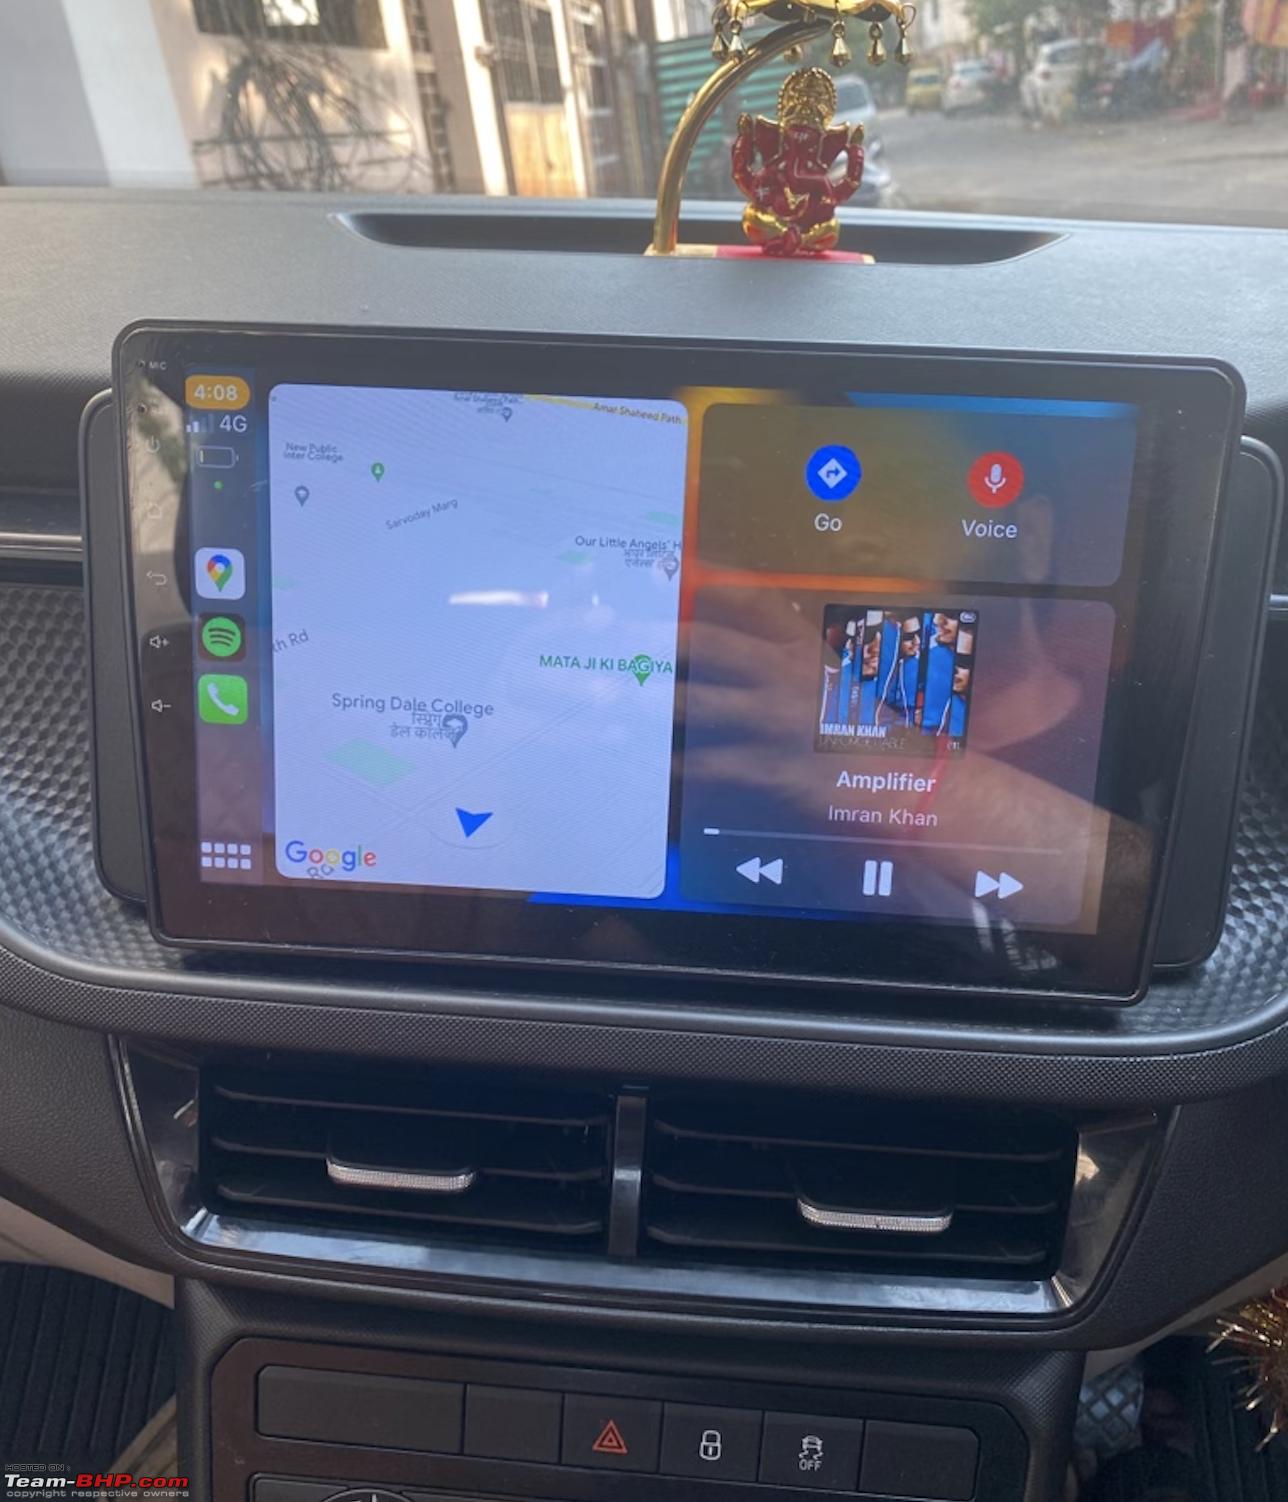 Carlinkit 4.0  Wireless Carplay & Android Auto from the same